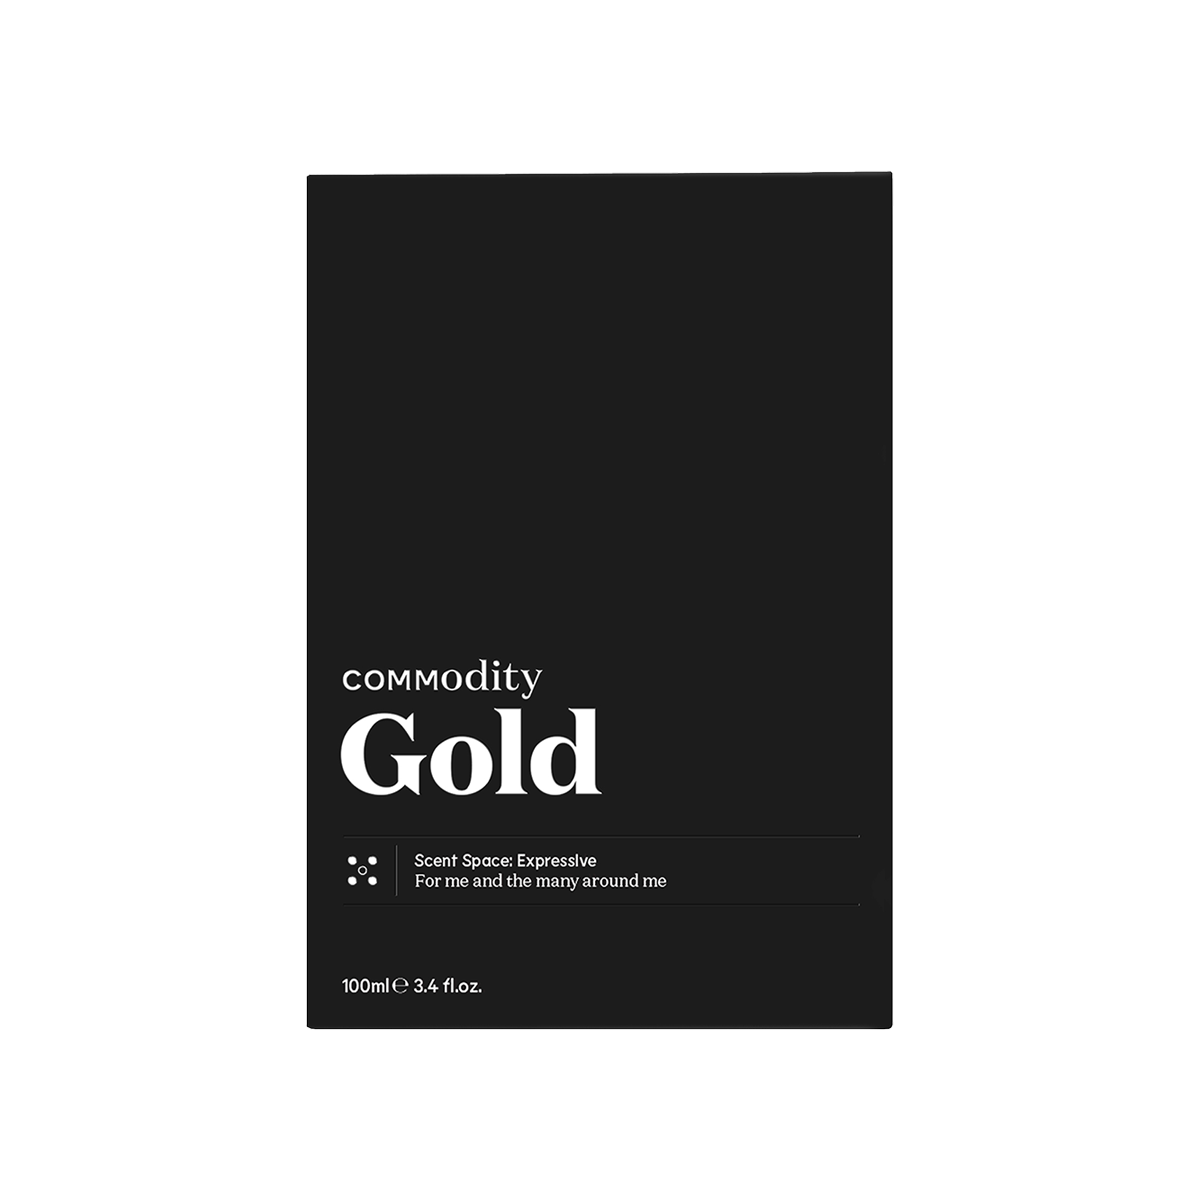 Commodity - Gold Expressive